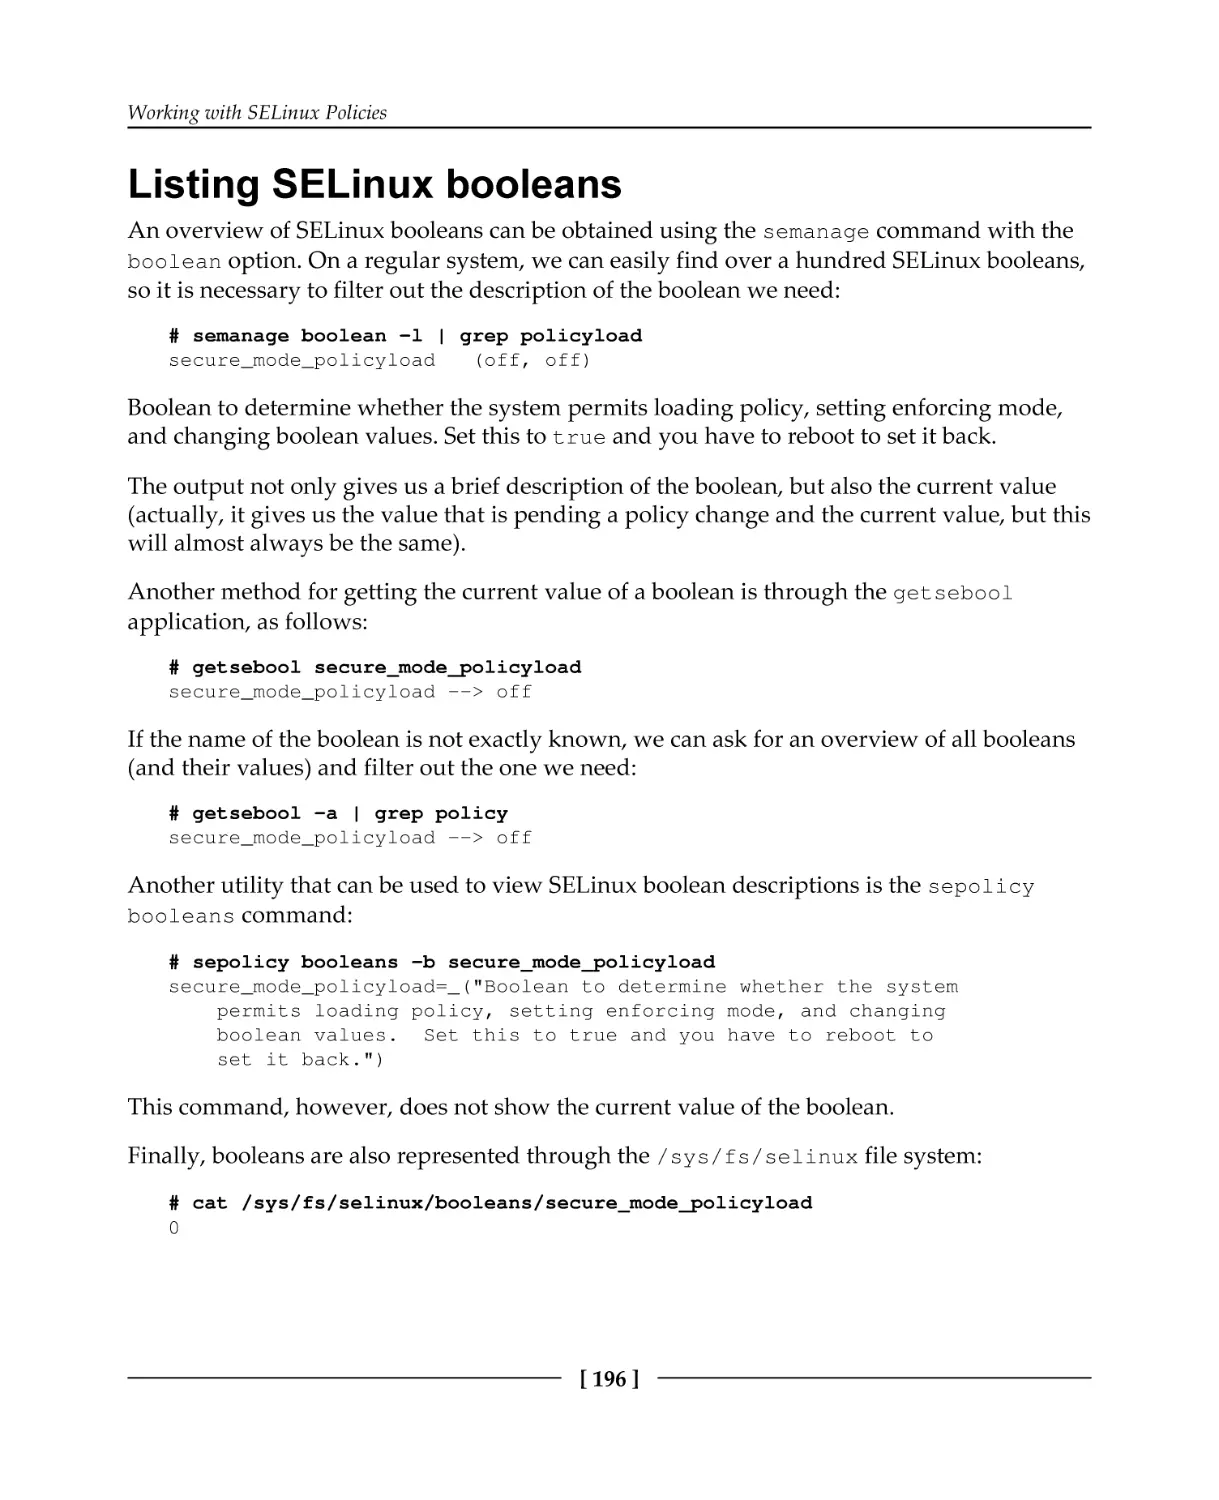 Listing SELinux booleans